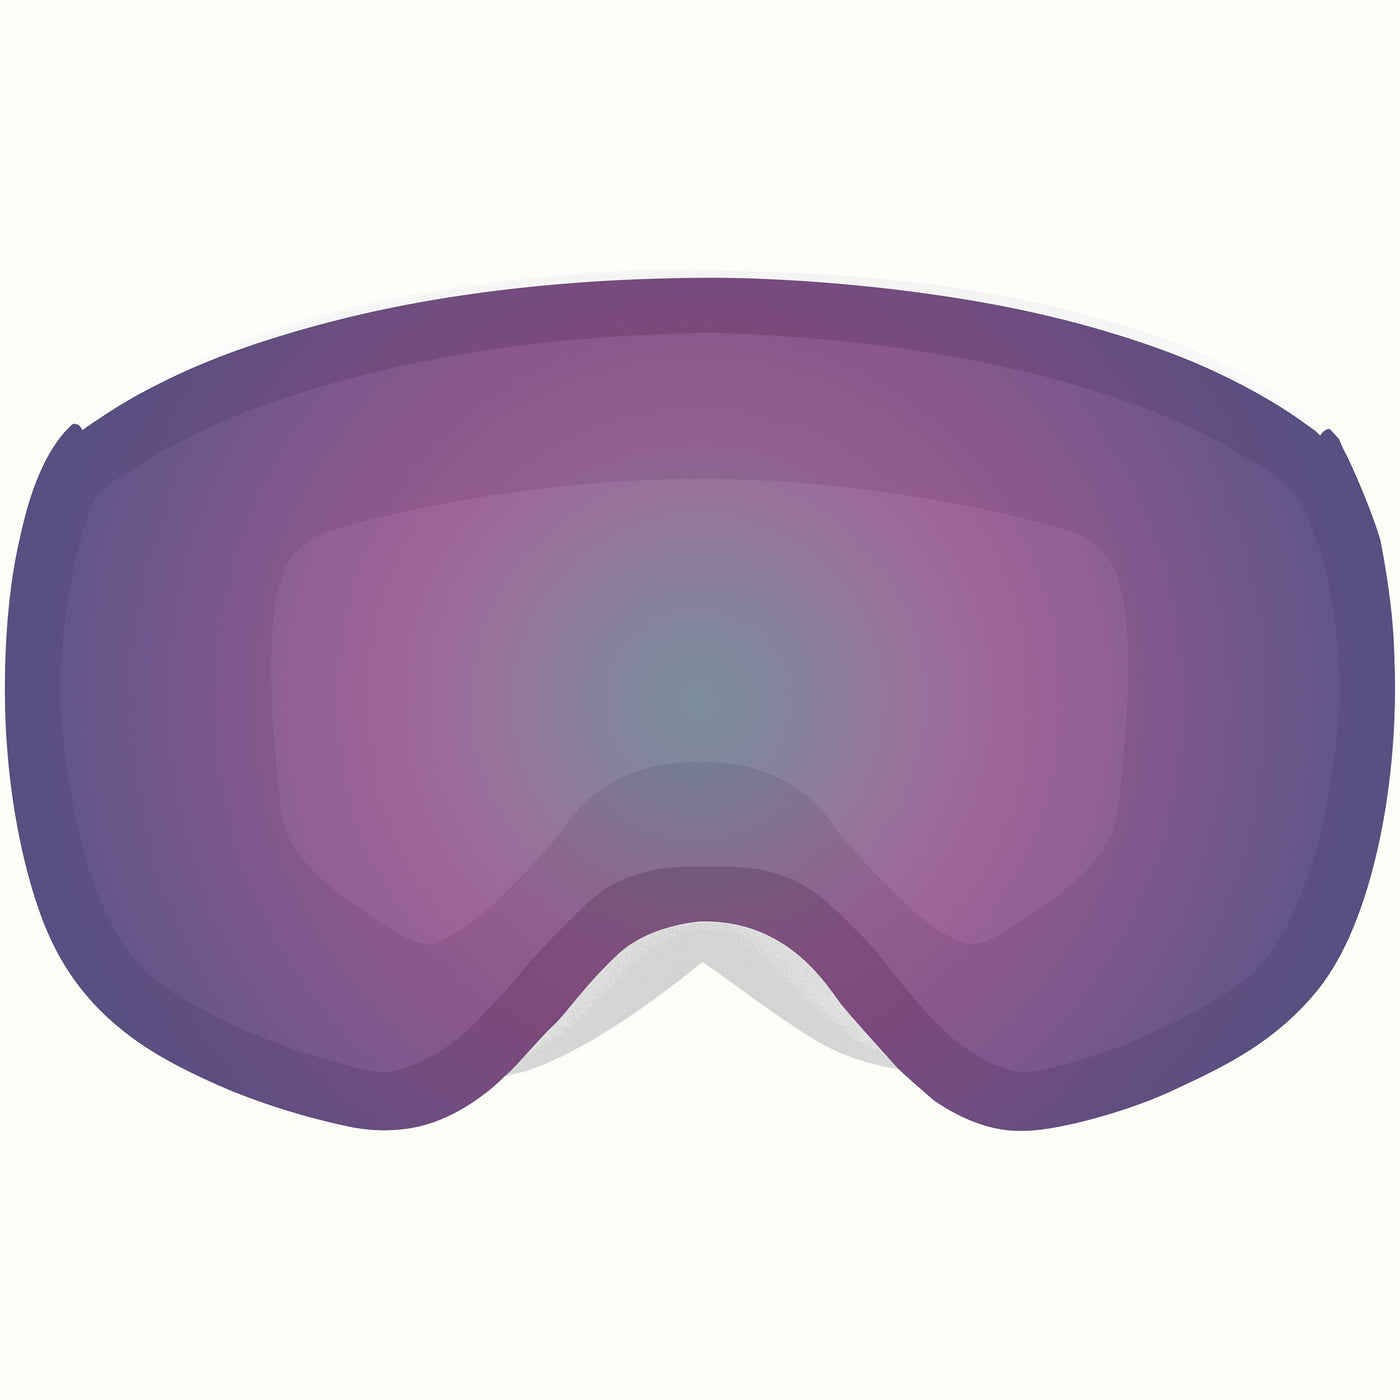 Traverse Plus Goggles Magnetic Lens | Bismuth